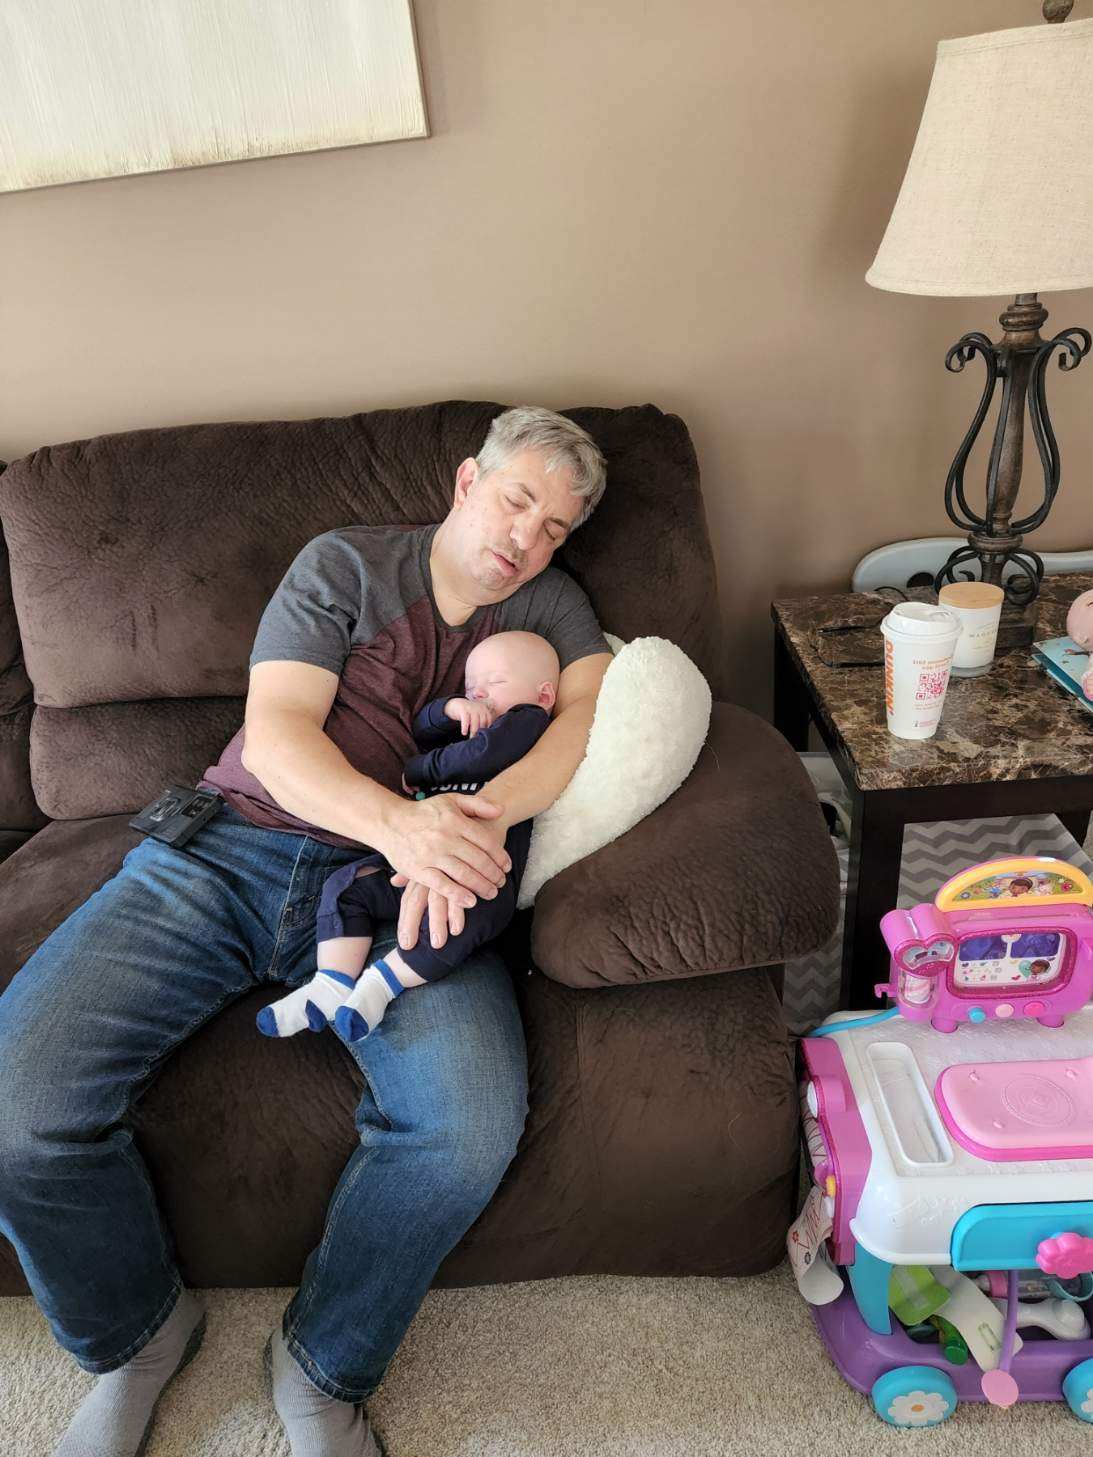 David Priolo and his grandchild sleeping on a couch